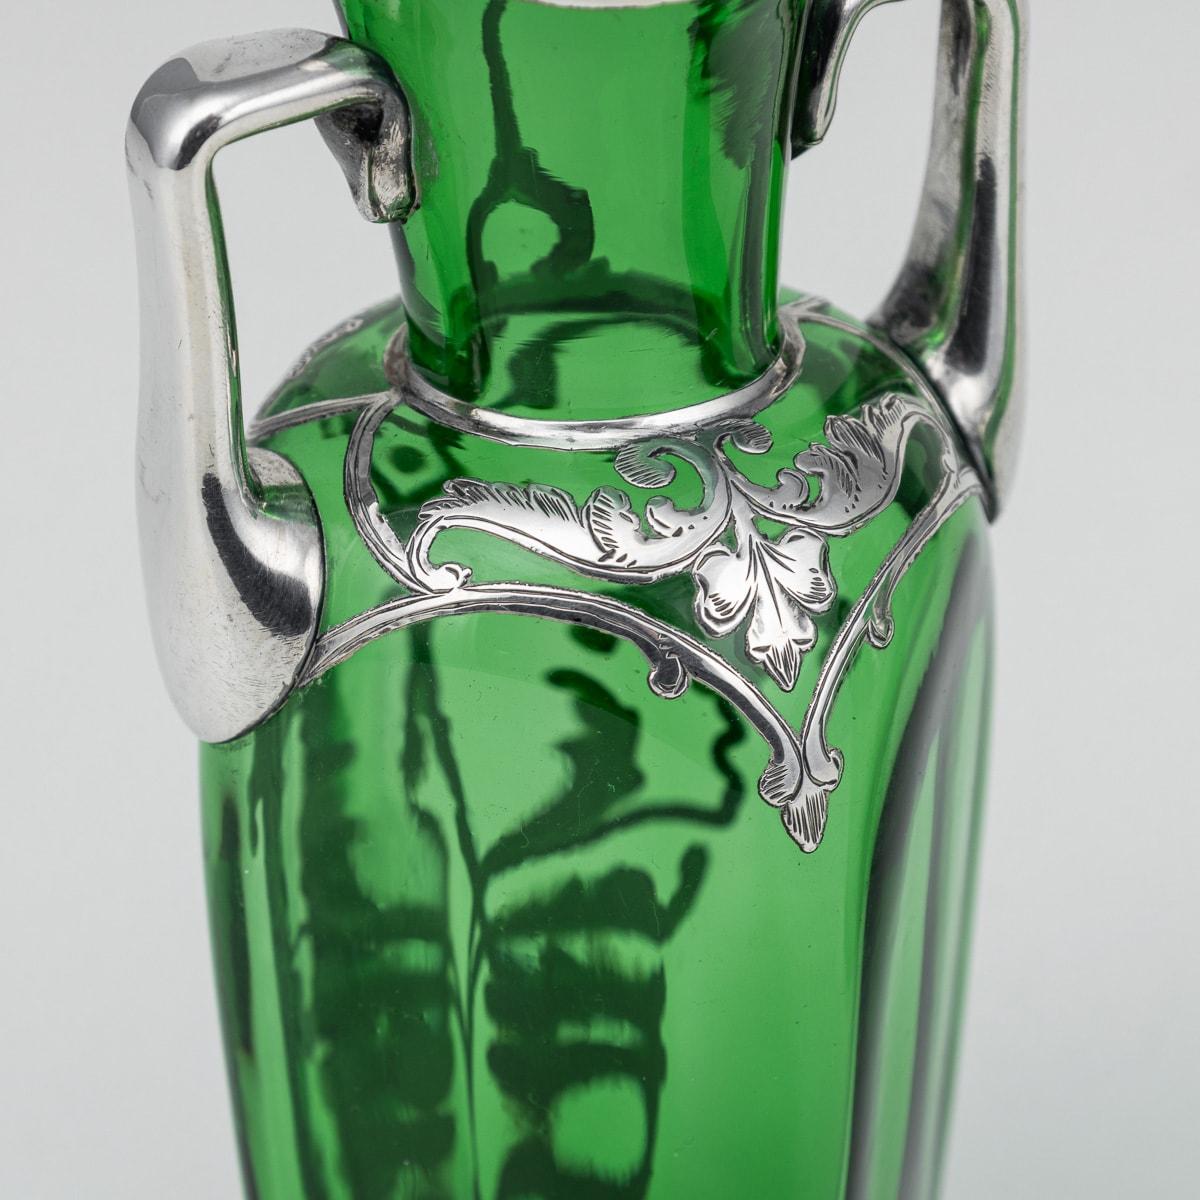 20th Century American Pair Of Green Glass Vases With Silver Overlay c.1920 For Sale 9